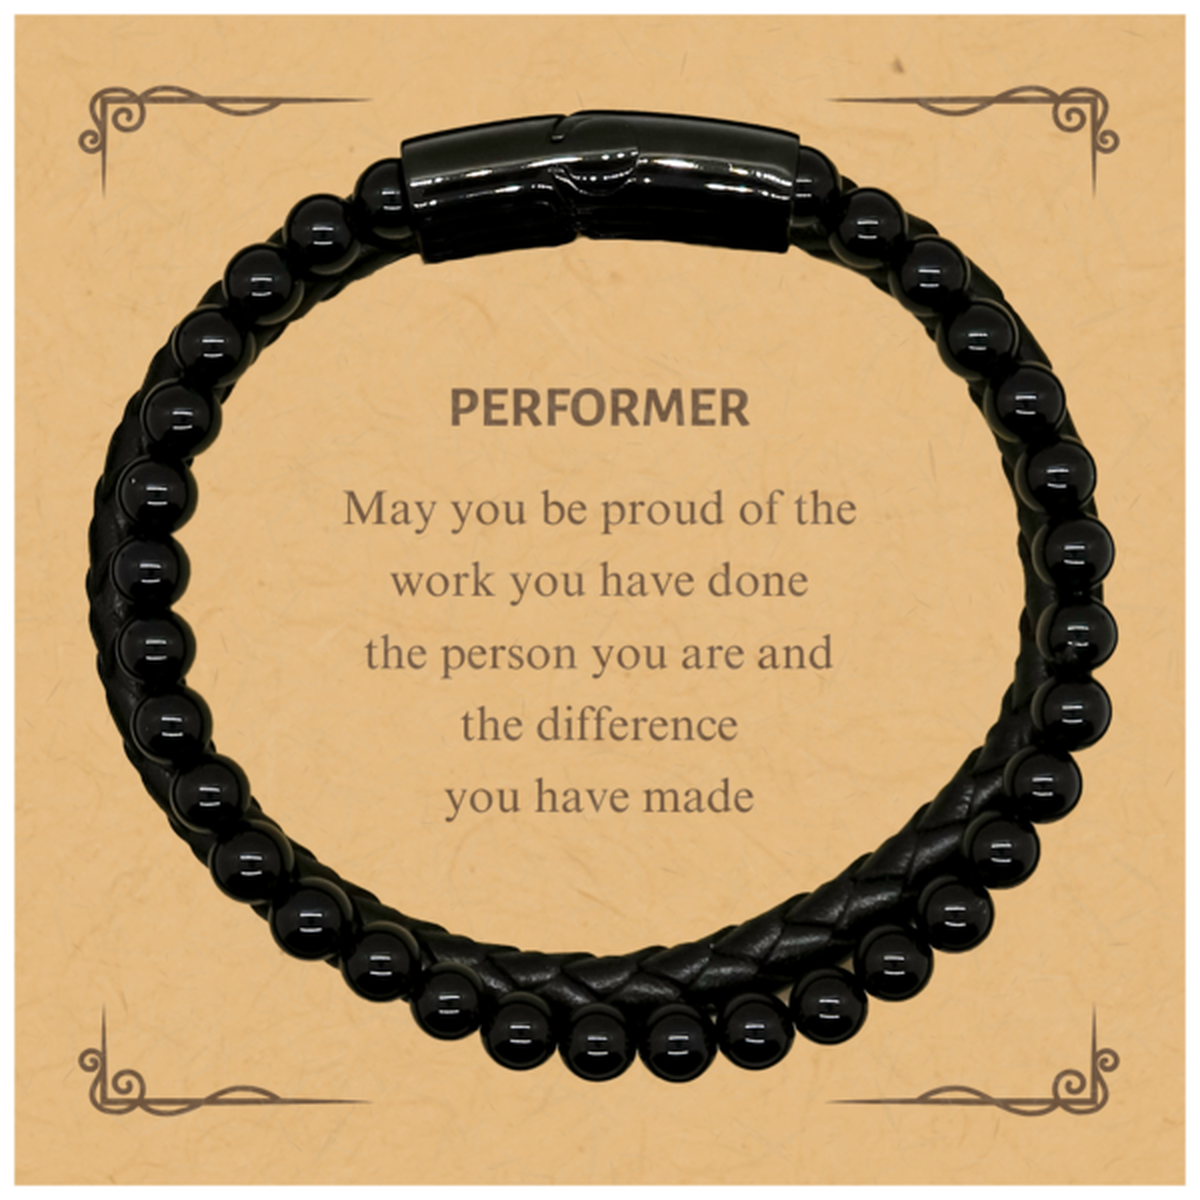 Performer May you be proud of the work you have done, Retirement Performer Stone Leather Bracelets for Colleague Appreciation Gifts Amazing for Performer